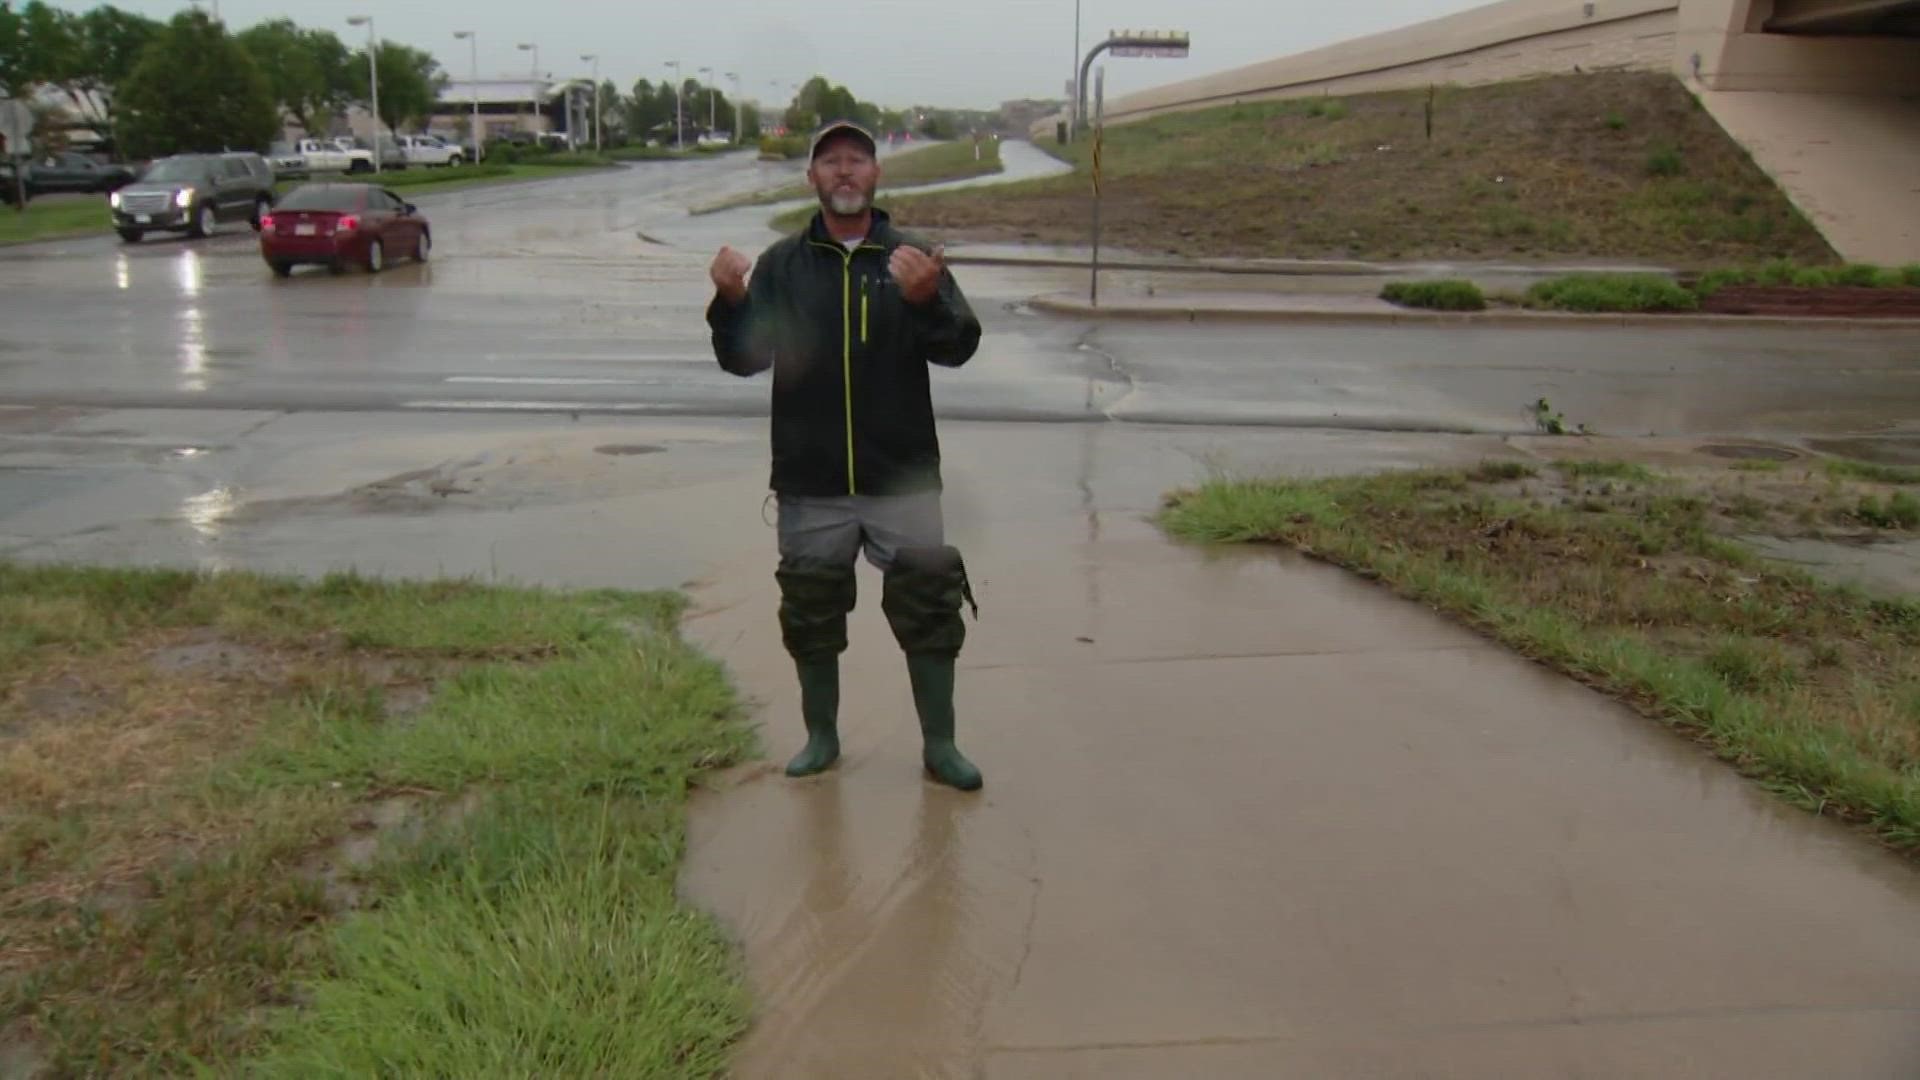 9NEWS Meteorologist Cory Reppenhagen reports from Centennial where heavy rains are causing streets to flood.